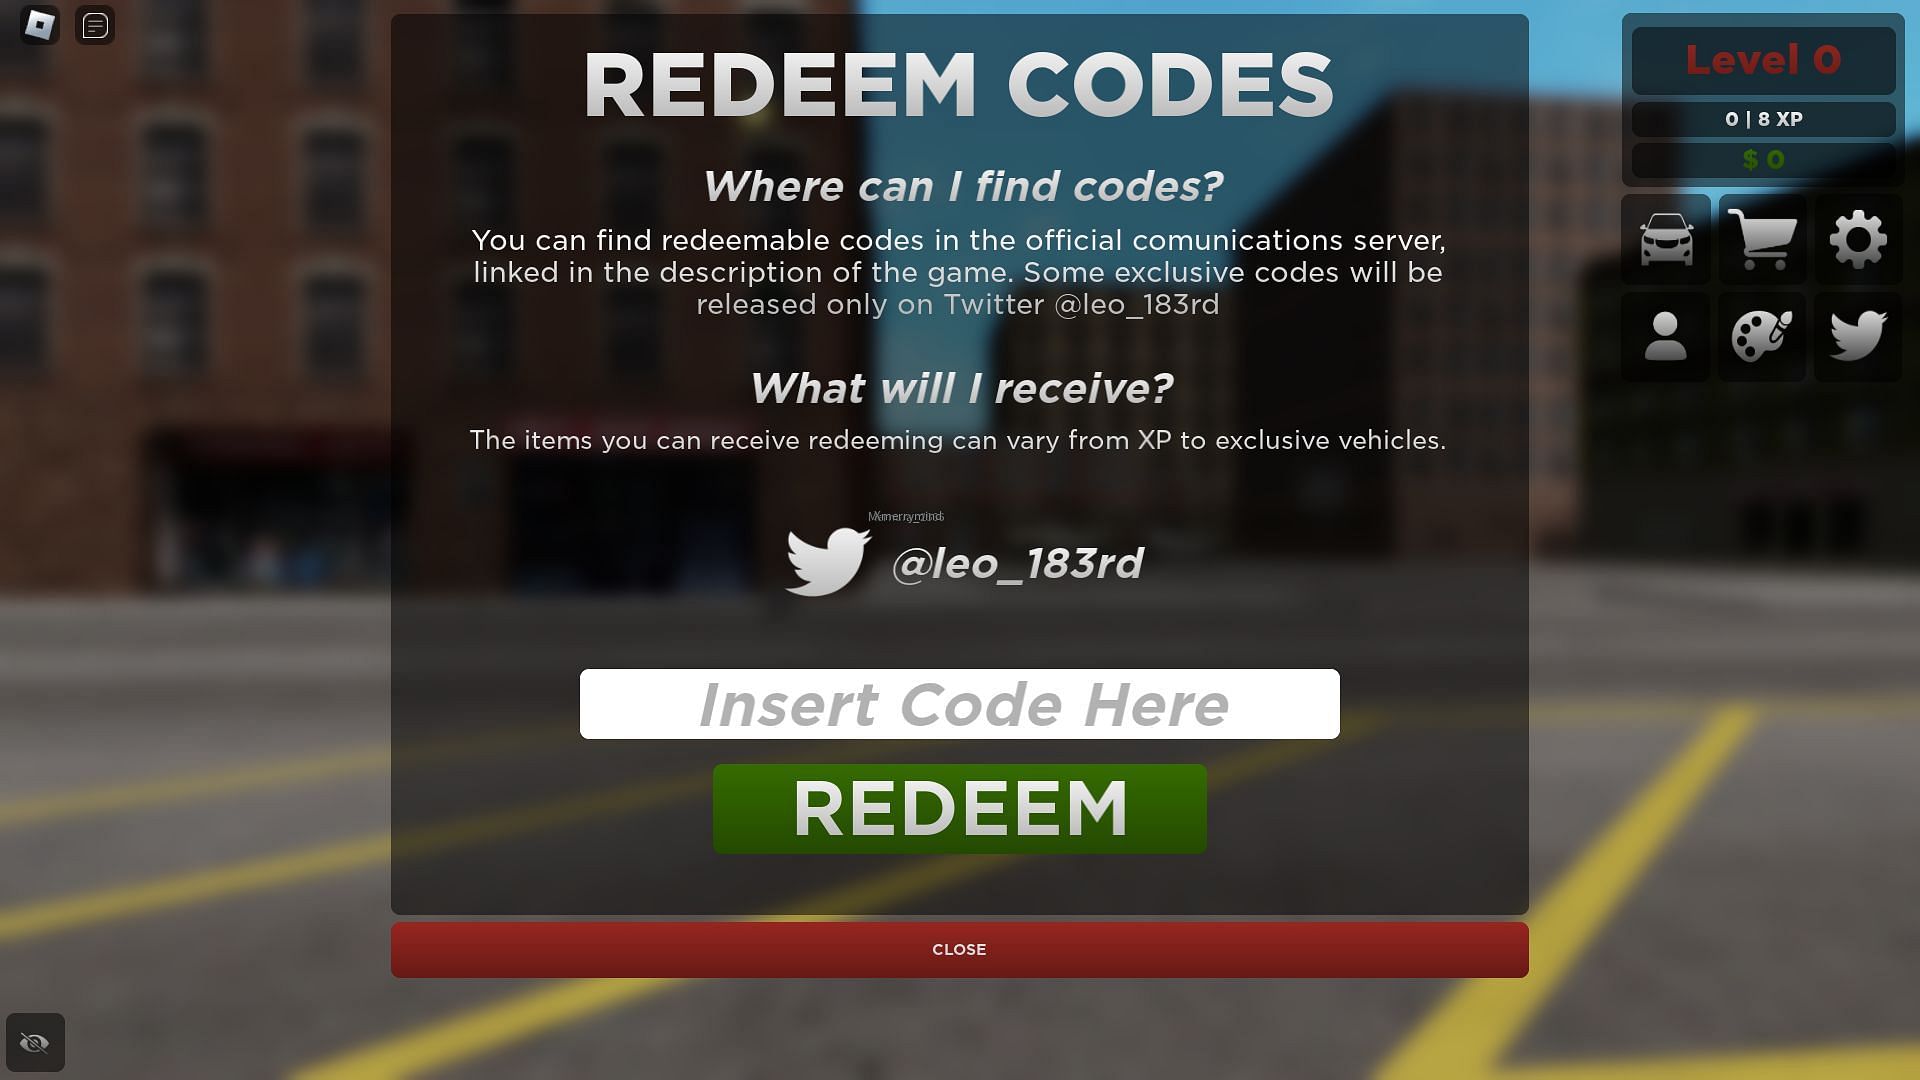 Active codes for Project: No Hesi (Image via Roblox)